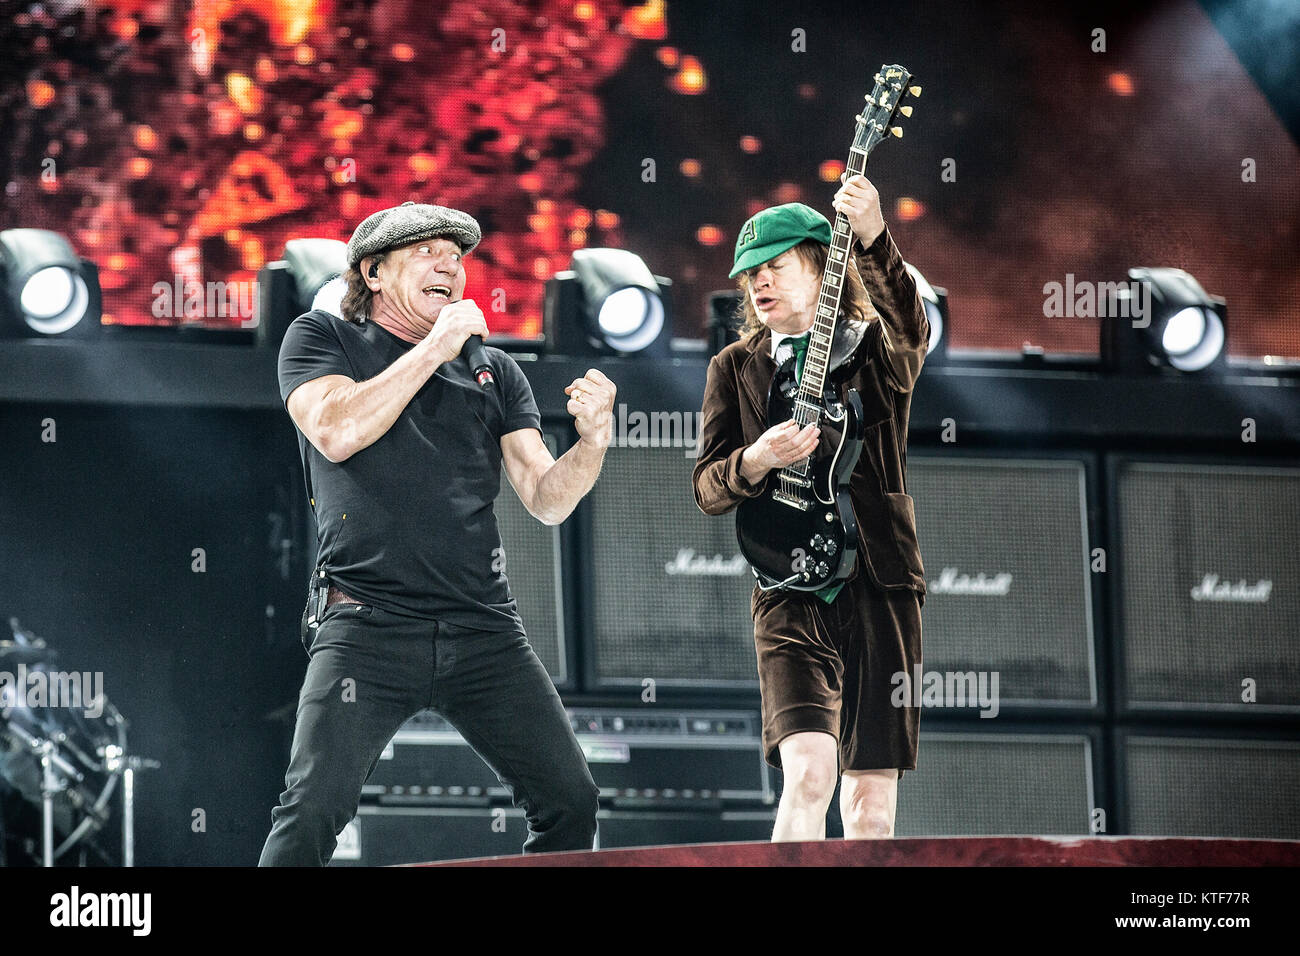 The Australian rock band AC/DC performs a live concert at Valle Hovin Stadion in Oslo as part of the Rock or Bust World 2015 Tour. Here musician and guitarist Angus Young (R) is seen live on stage with vokalist Brian Johnson (L). Norway, 17/07 2015. Stock Photo